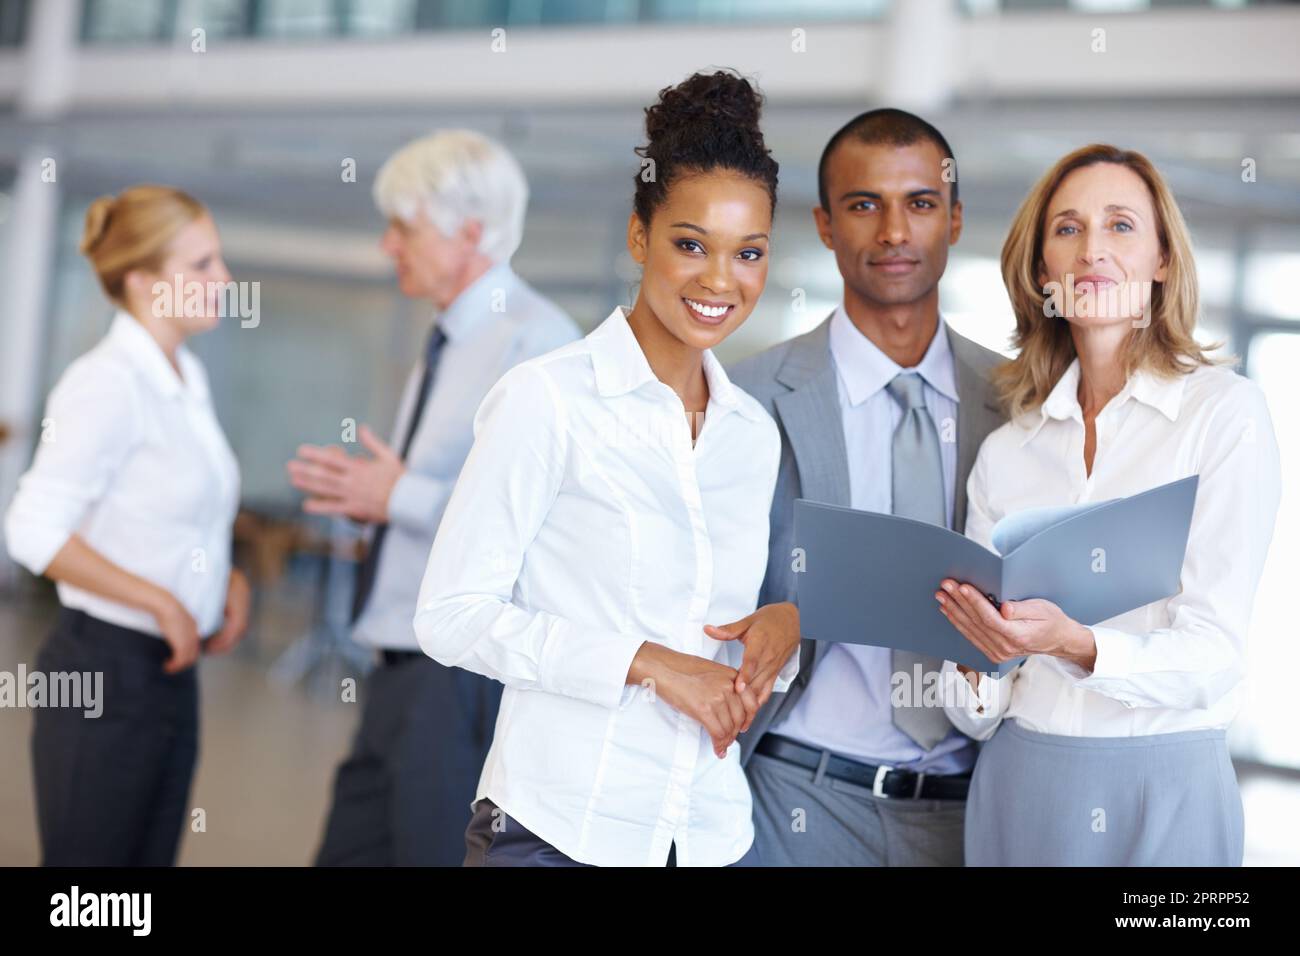 Smiling executives with documents. Portrait of multi ethnic executives with documents at office. Stock Photo